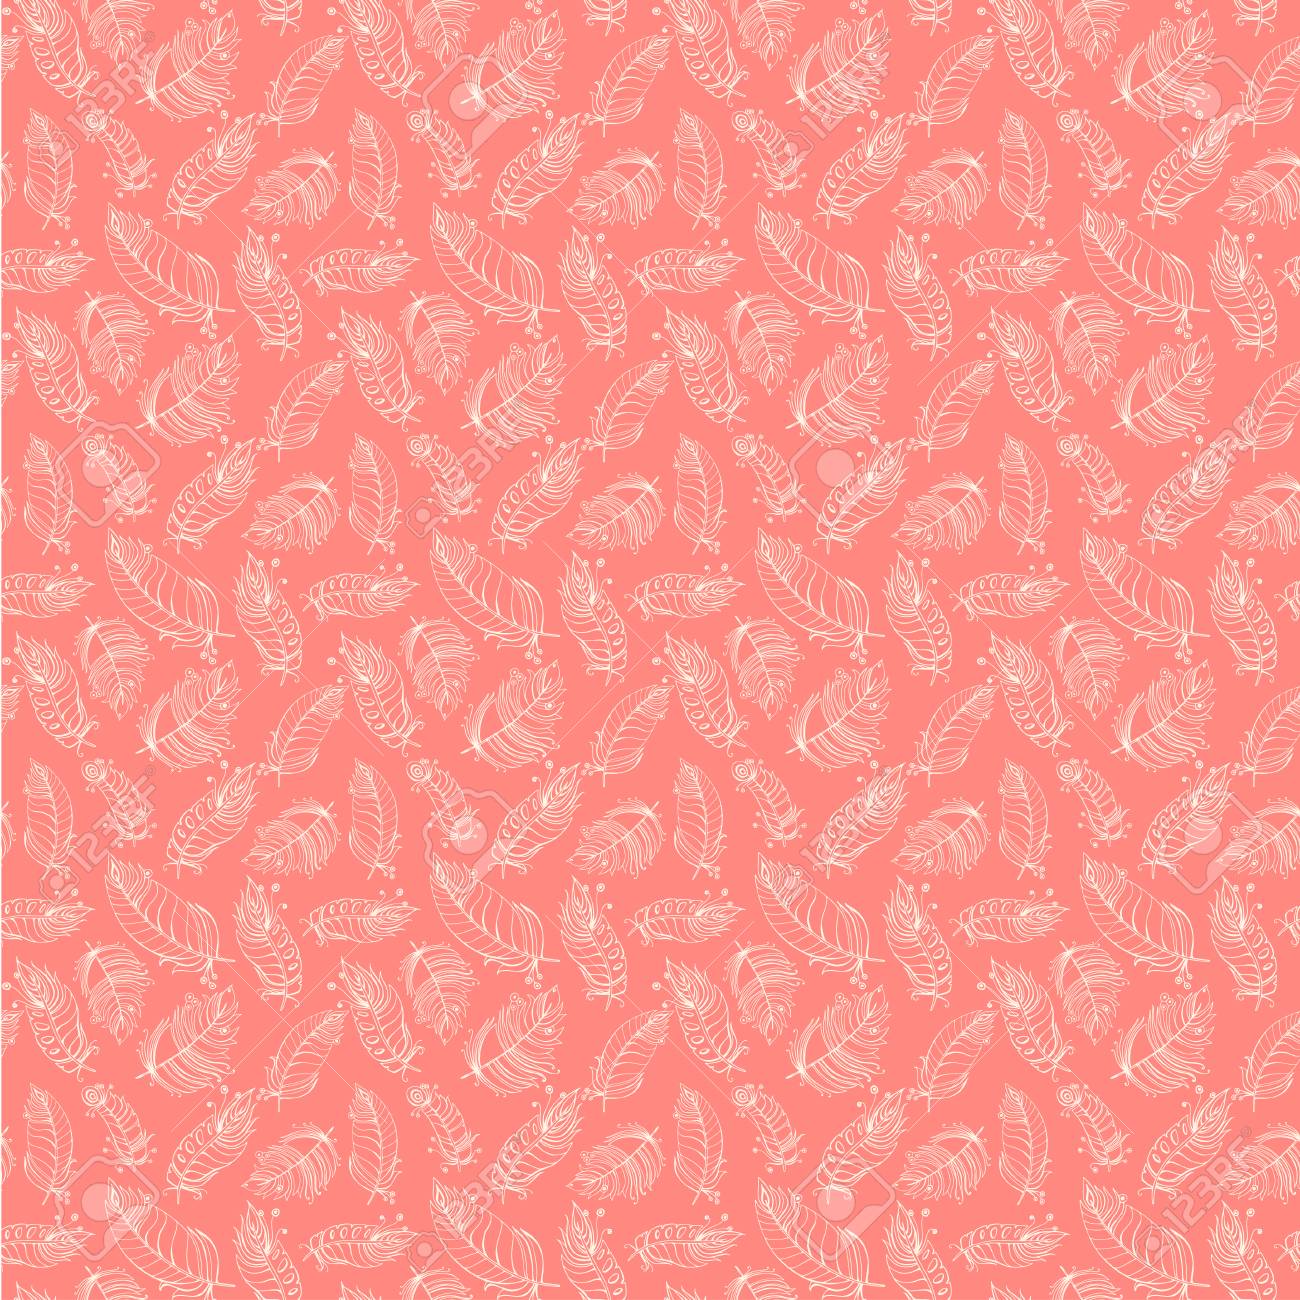 Vector Pink Seamless Pattern Ethnic Retro Design With Feathers